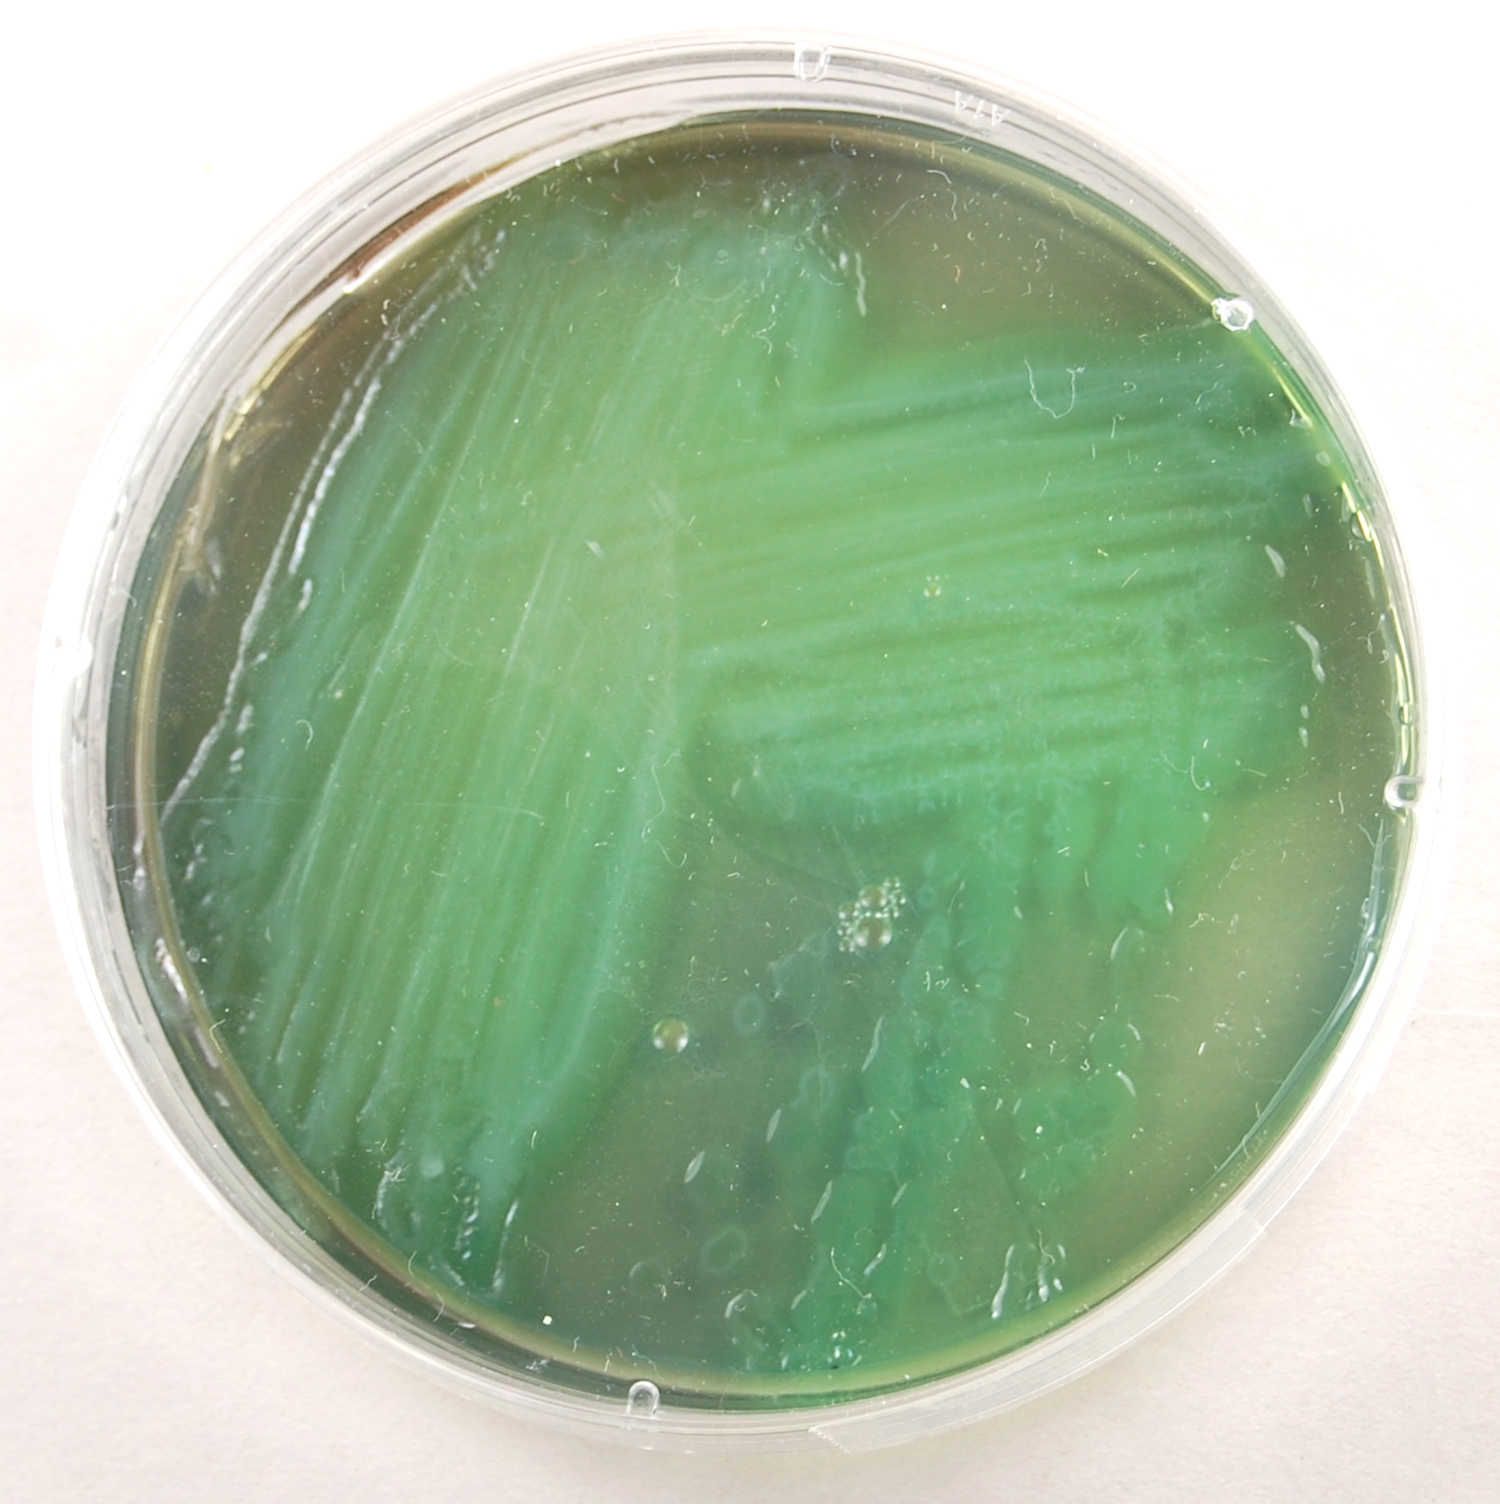 Photograph of a TSA plate culture of <i>Pseudomonas aeruginosa</i> showing its green, water soluble pigment.